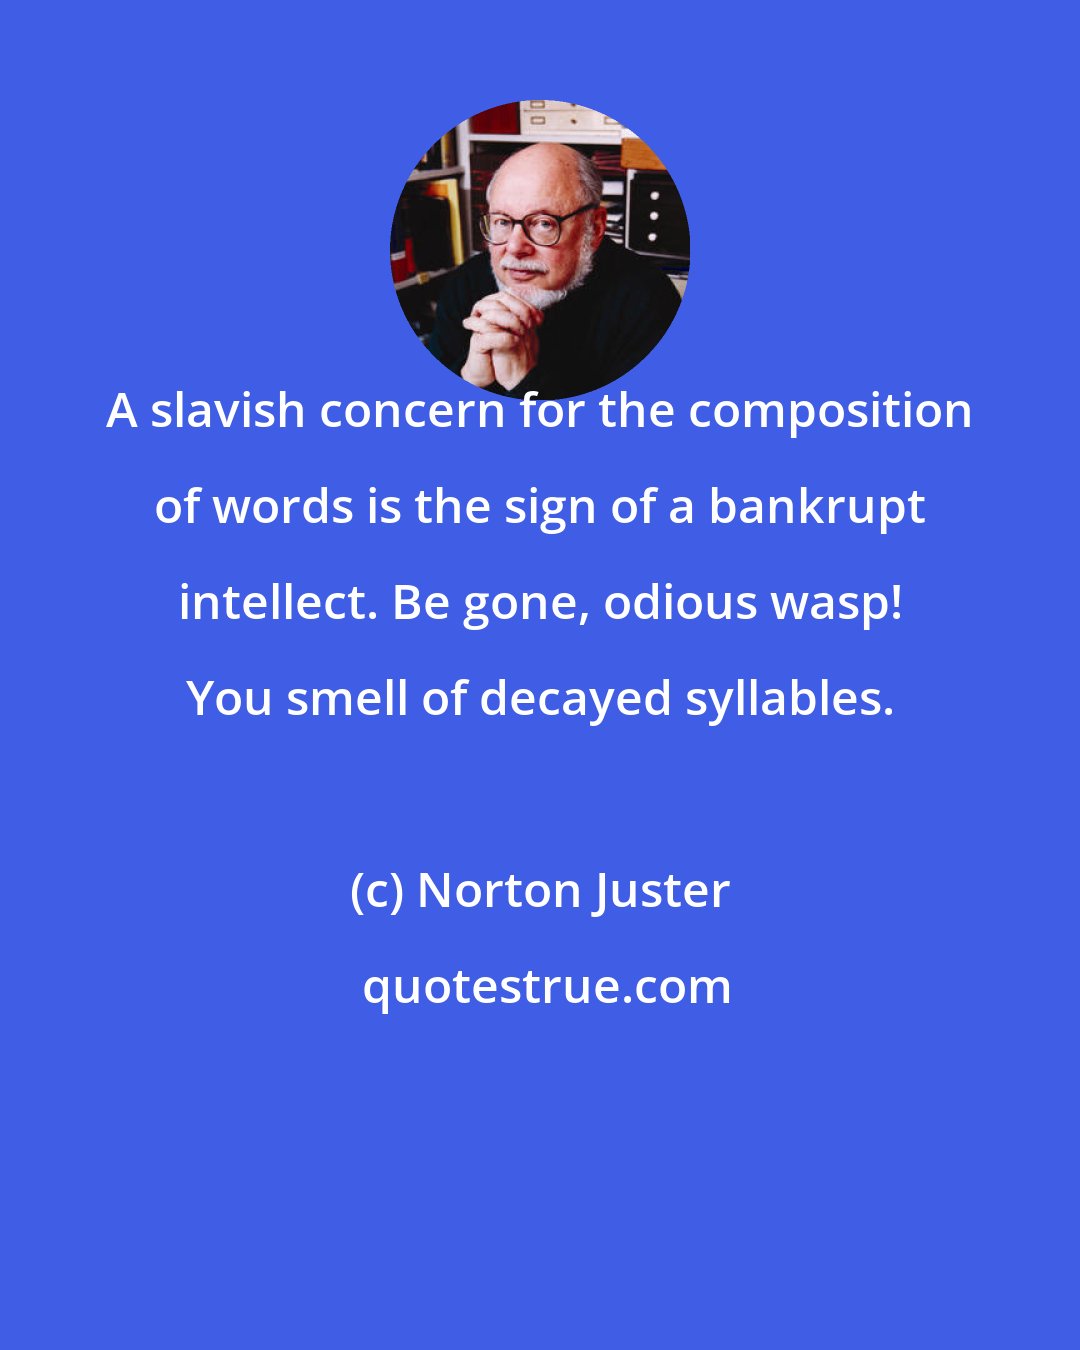 Norton Juster: A slavish concern for the composition of words is the sign of a bankrupt intellect. Be gone, odious wasp! You smell of decayed syllables.